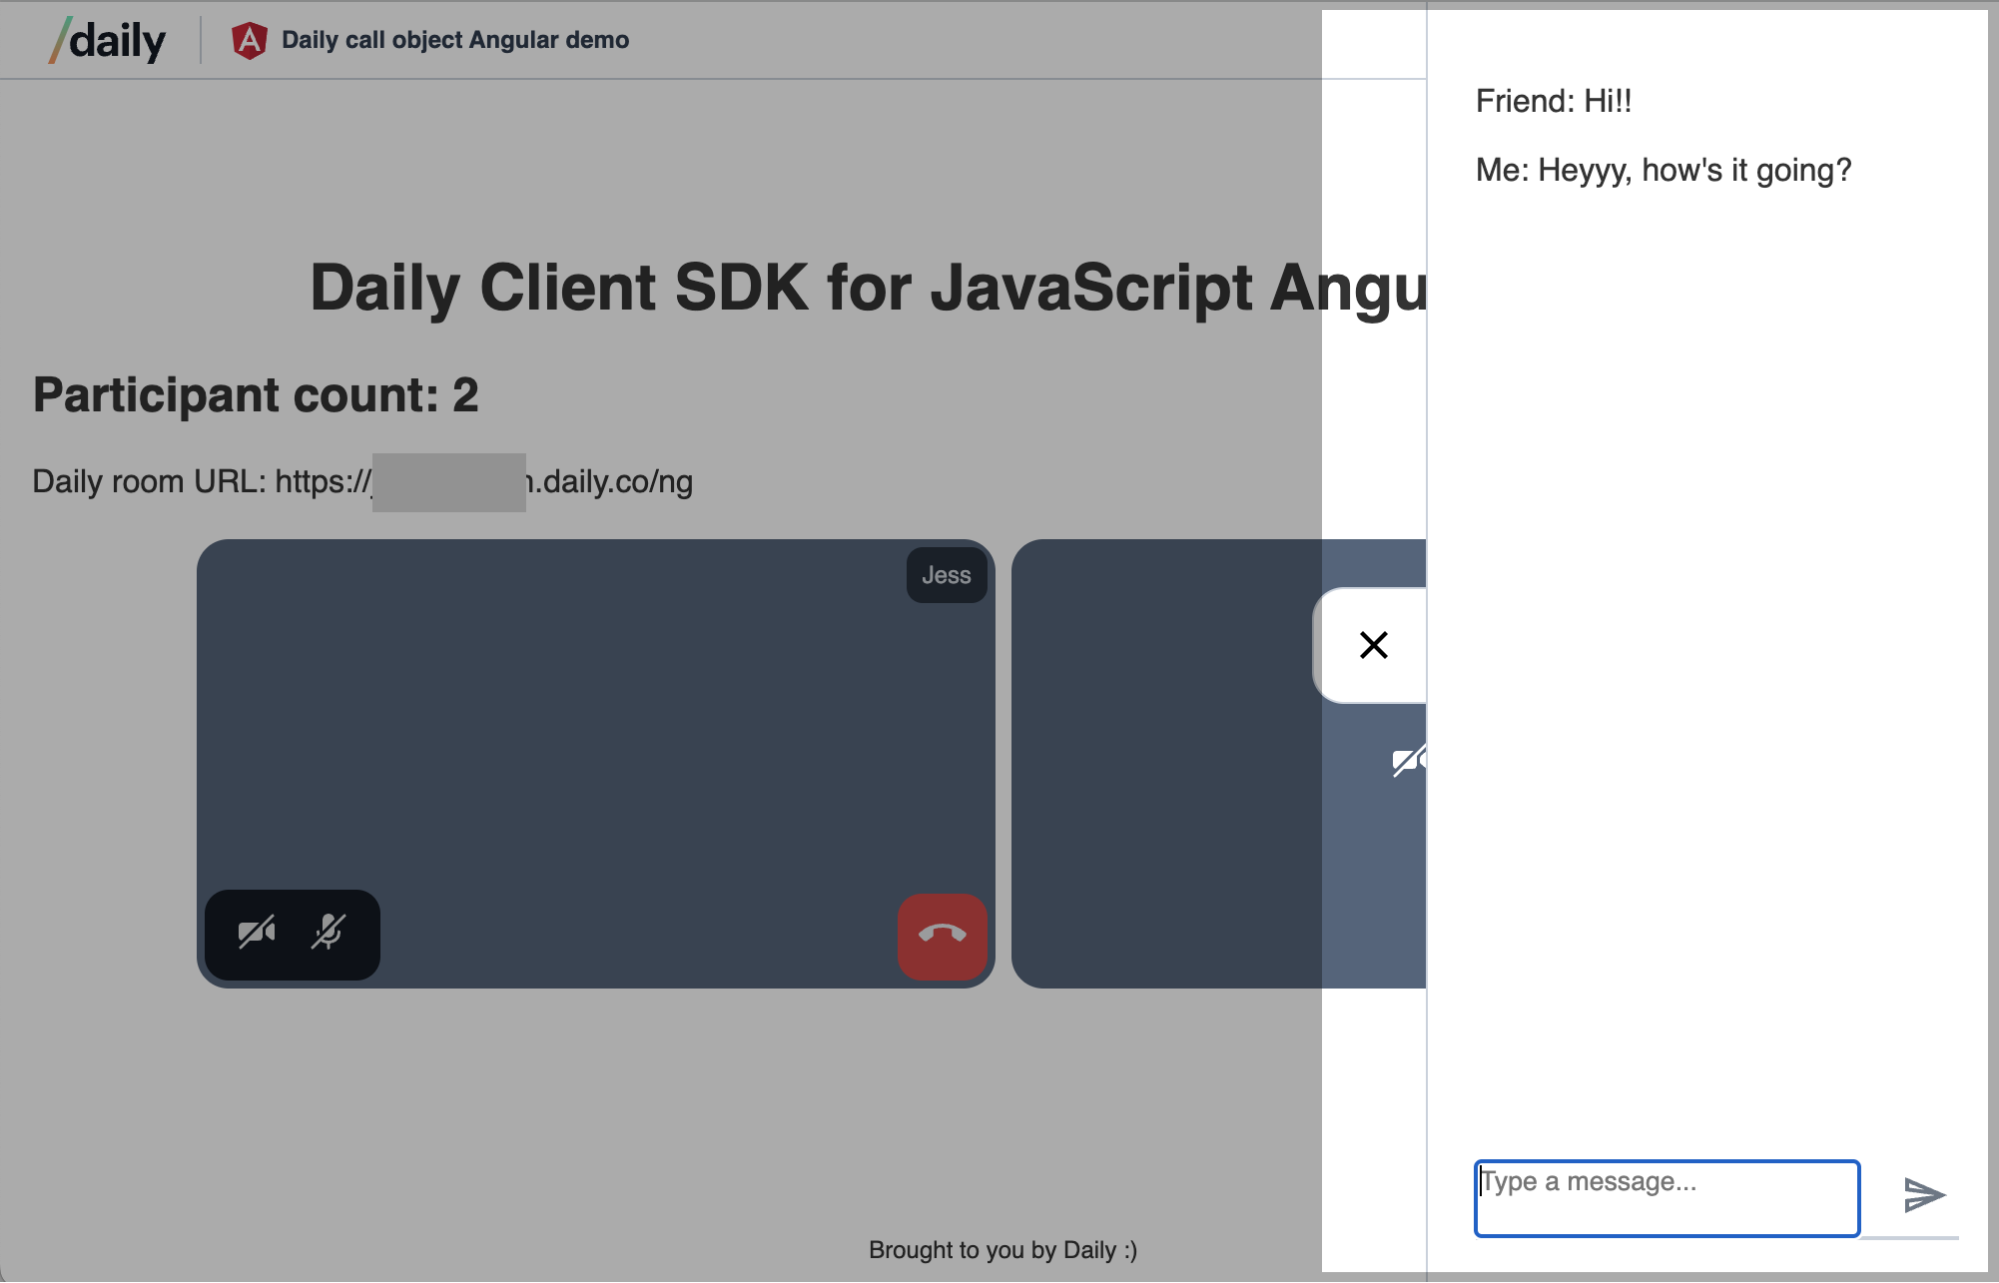 Slide-out chat panel on the right-hand side of the Angular video app